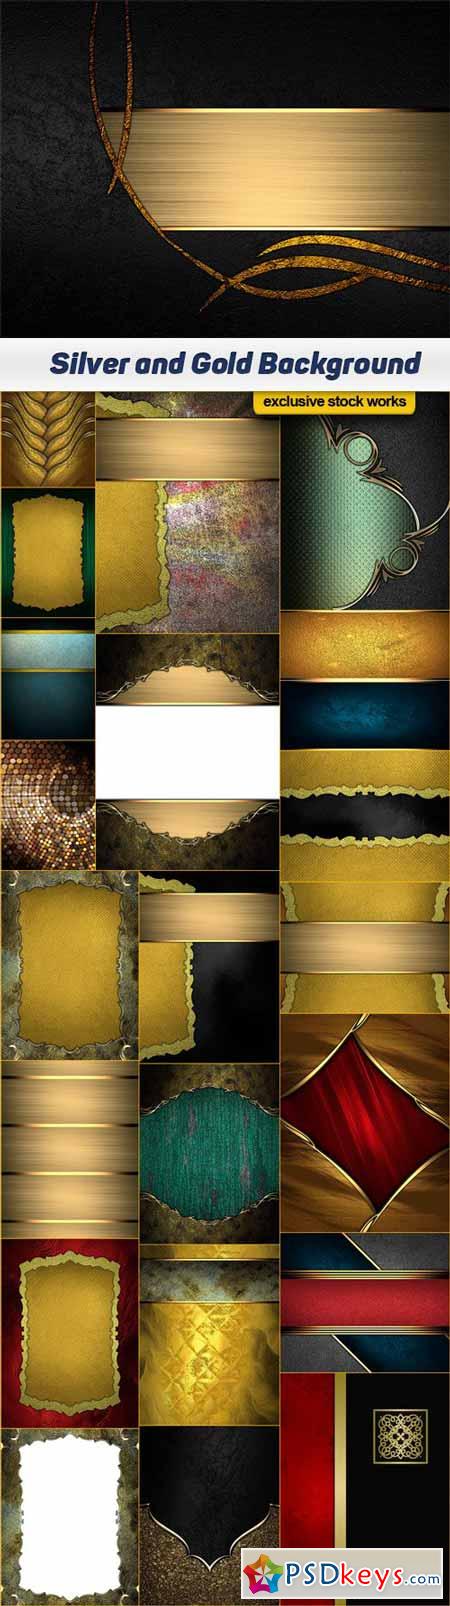 Silver and Gold Background 22x JPEG